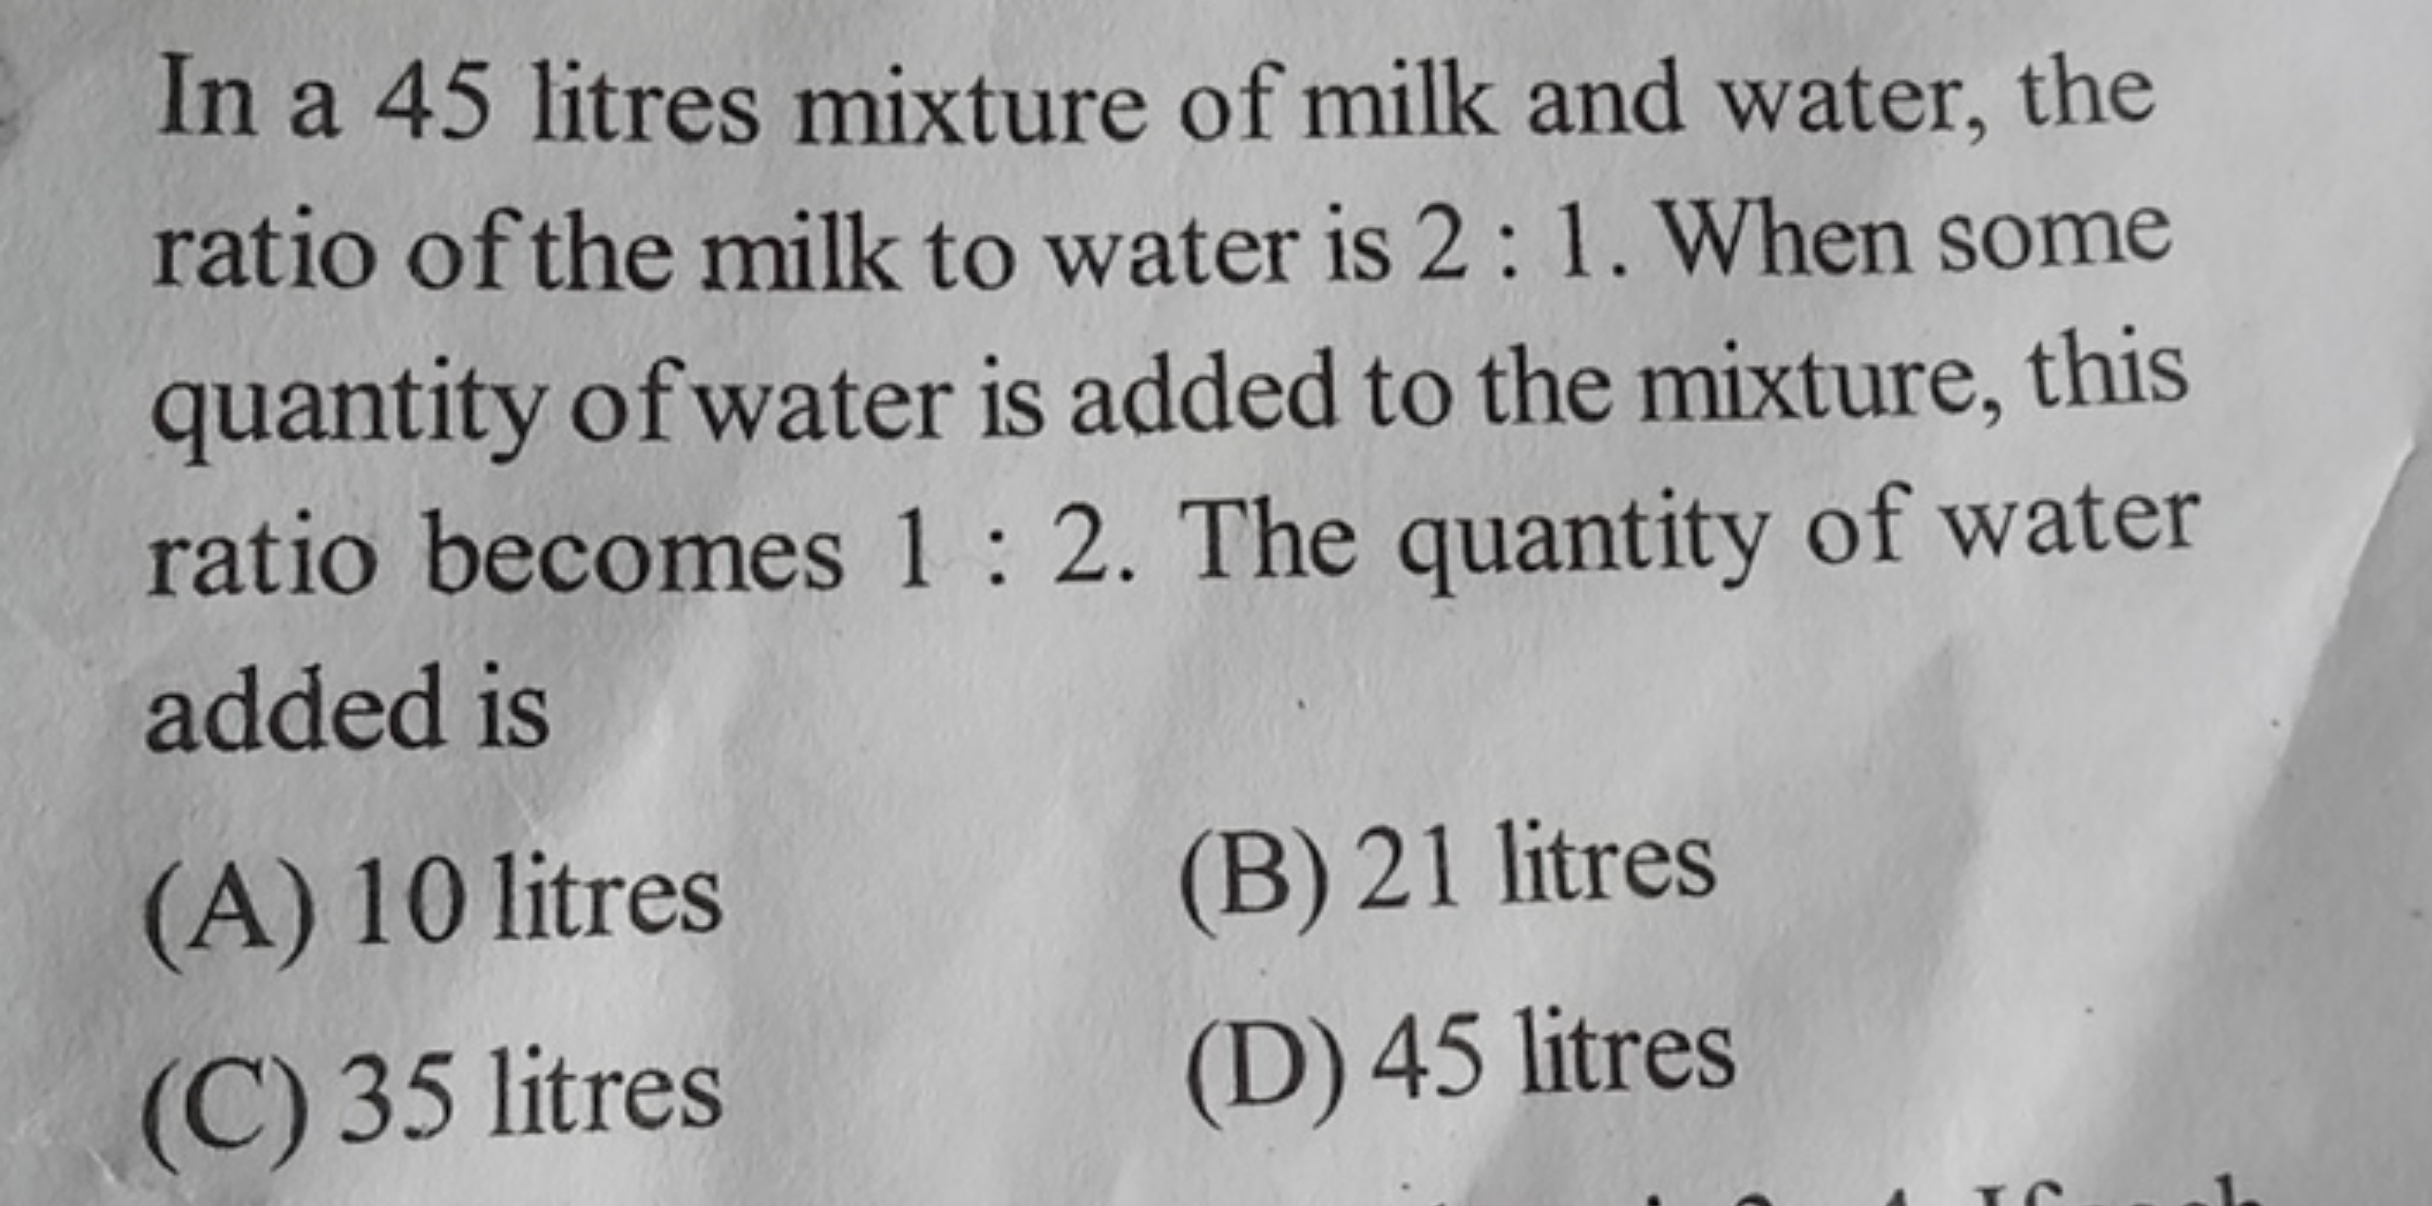 In a 45 litres mixture of milk and water, the ratio of the milk to wat